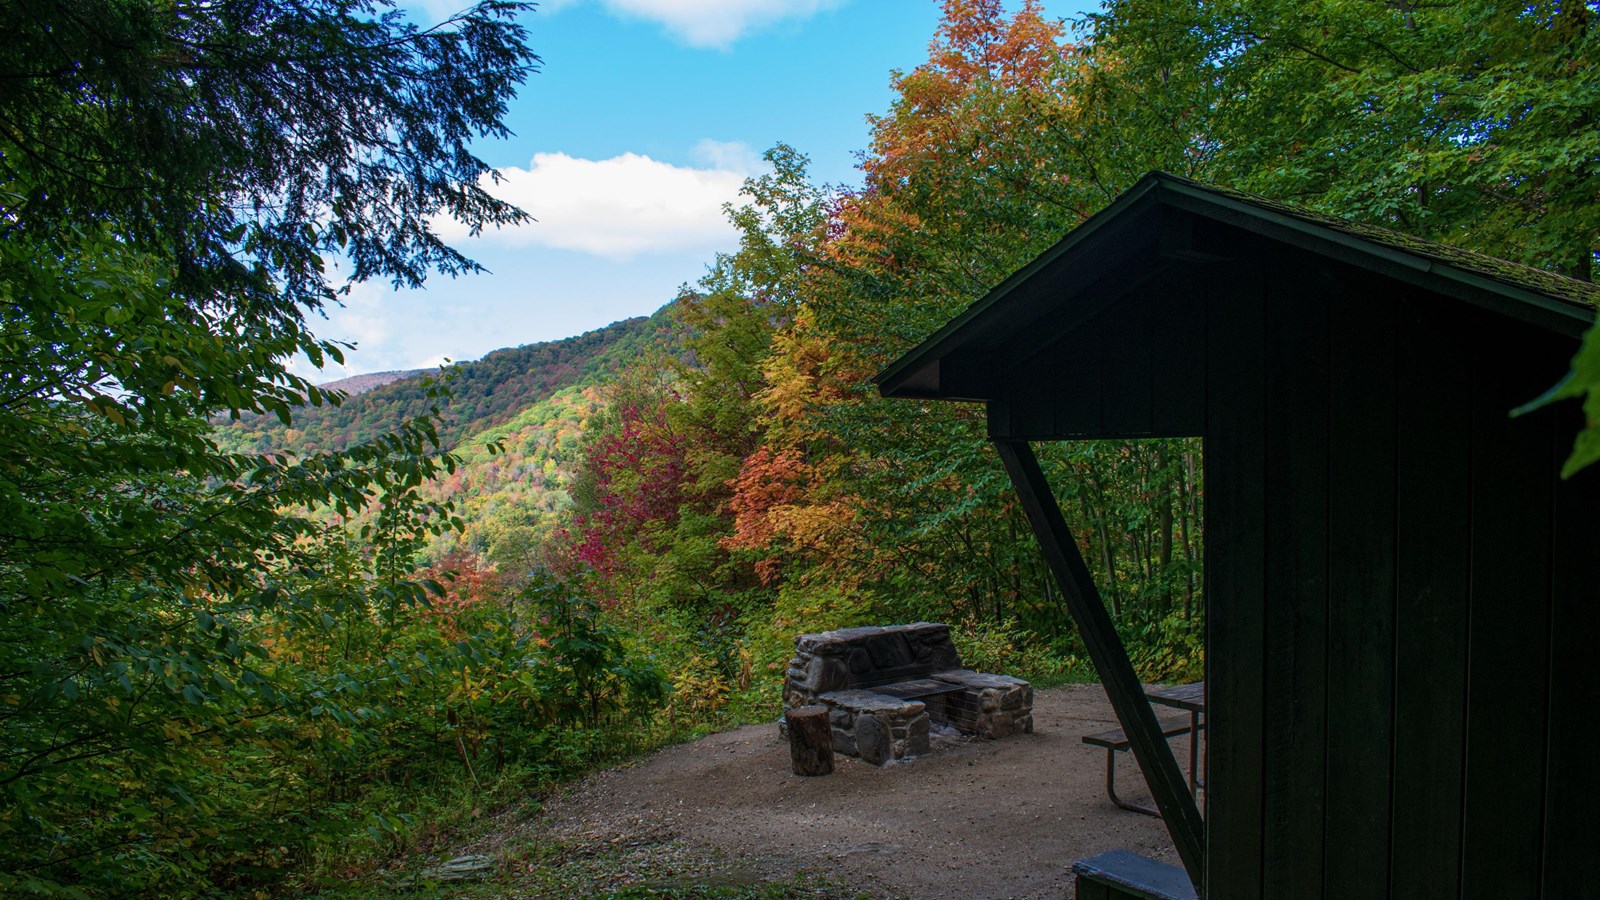 Image of a mountain overlook. There is a small, wooden outpost to the right of the image.